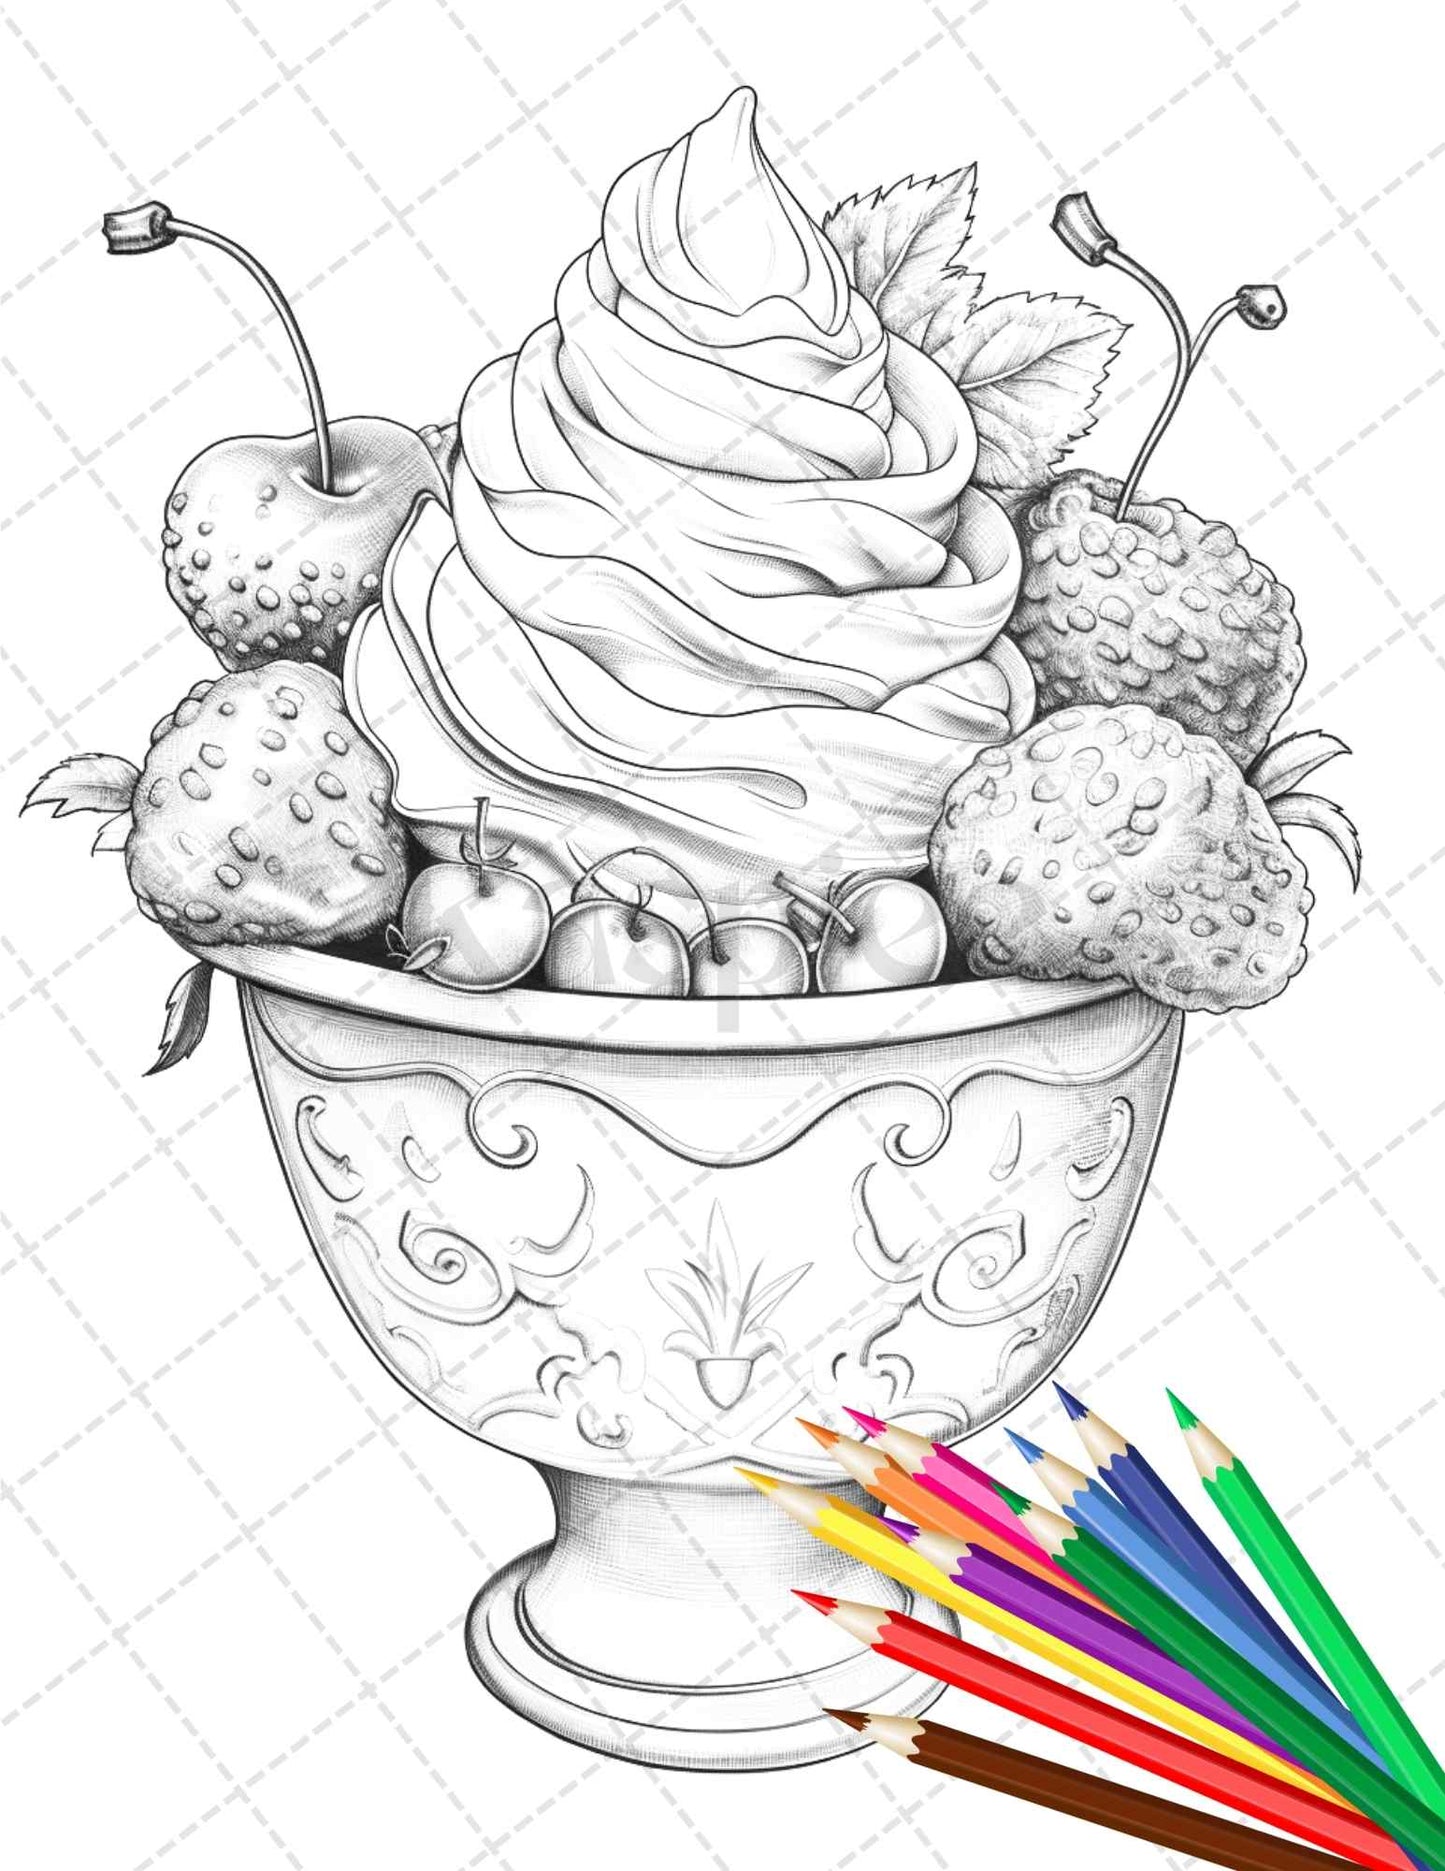 52 Printable Ice Cream Desserts Coloring Pages for Adults and Kids, Grayscale Coloring Page, PDF File Instant Download - raspiee